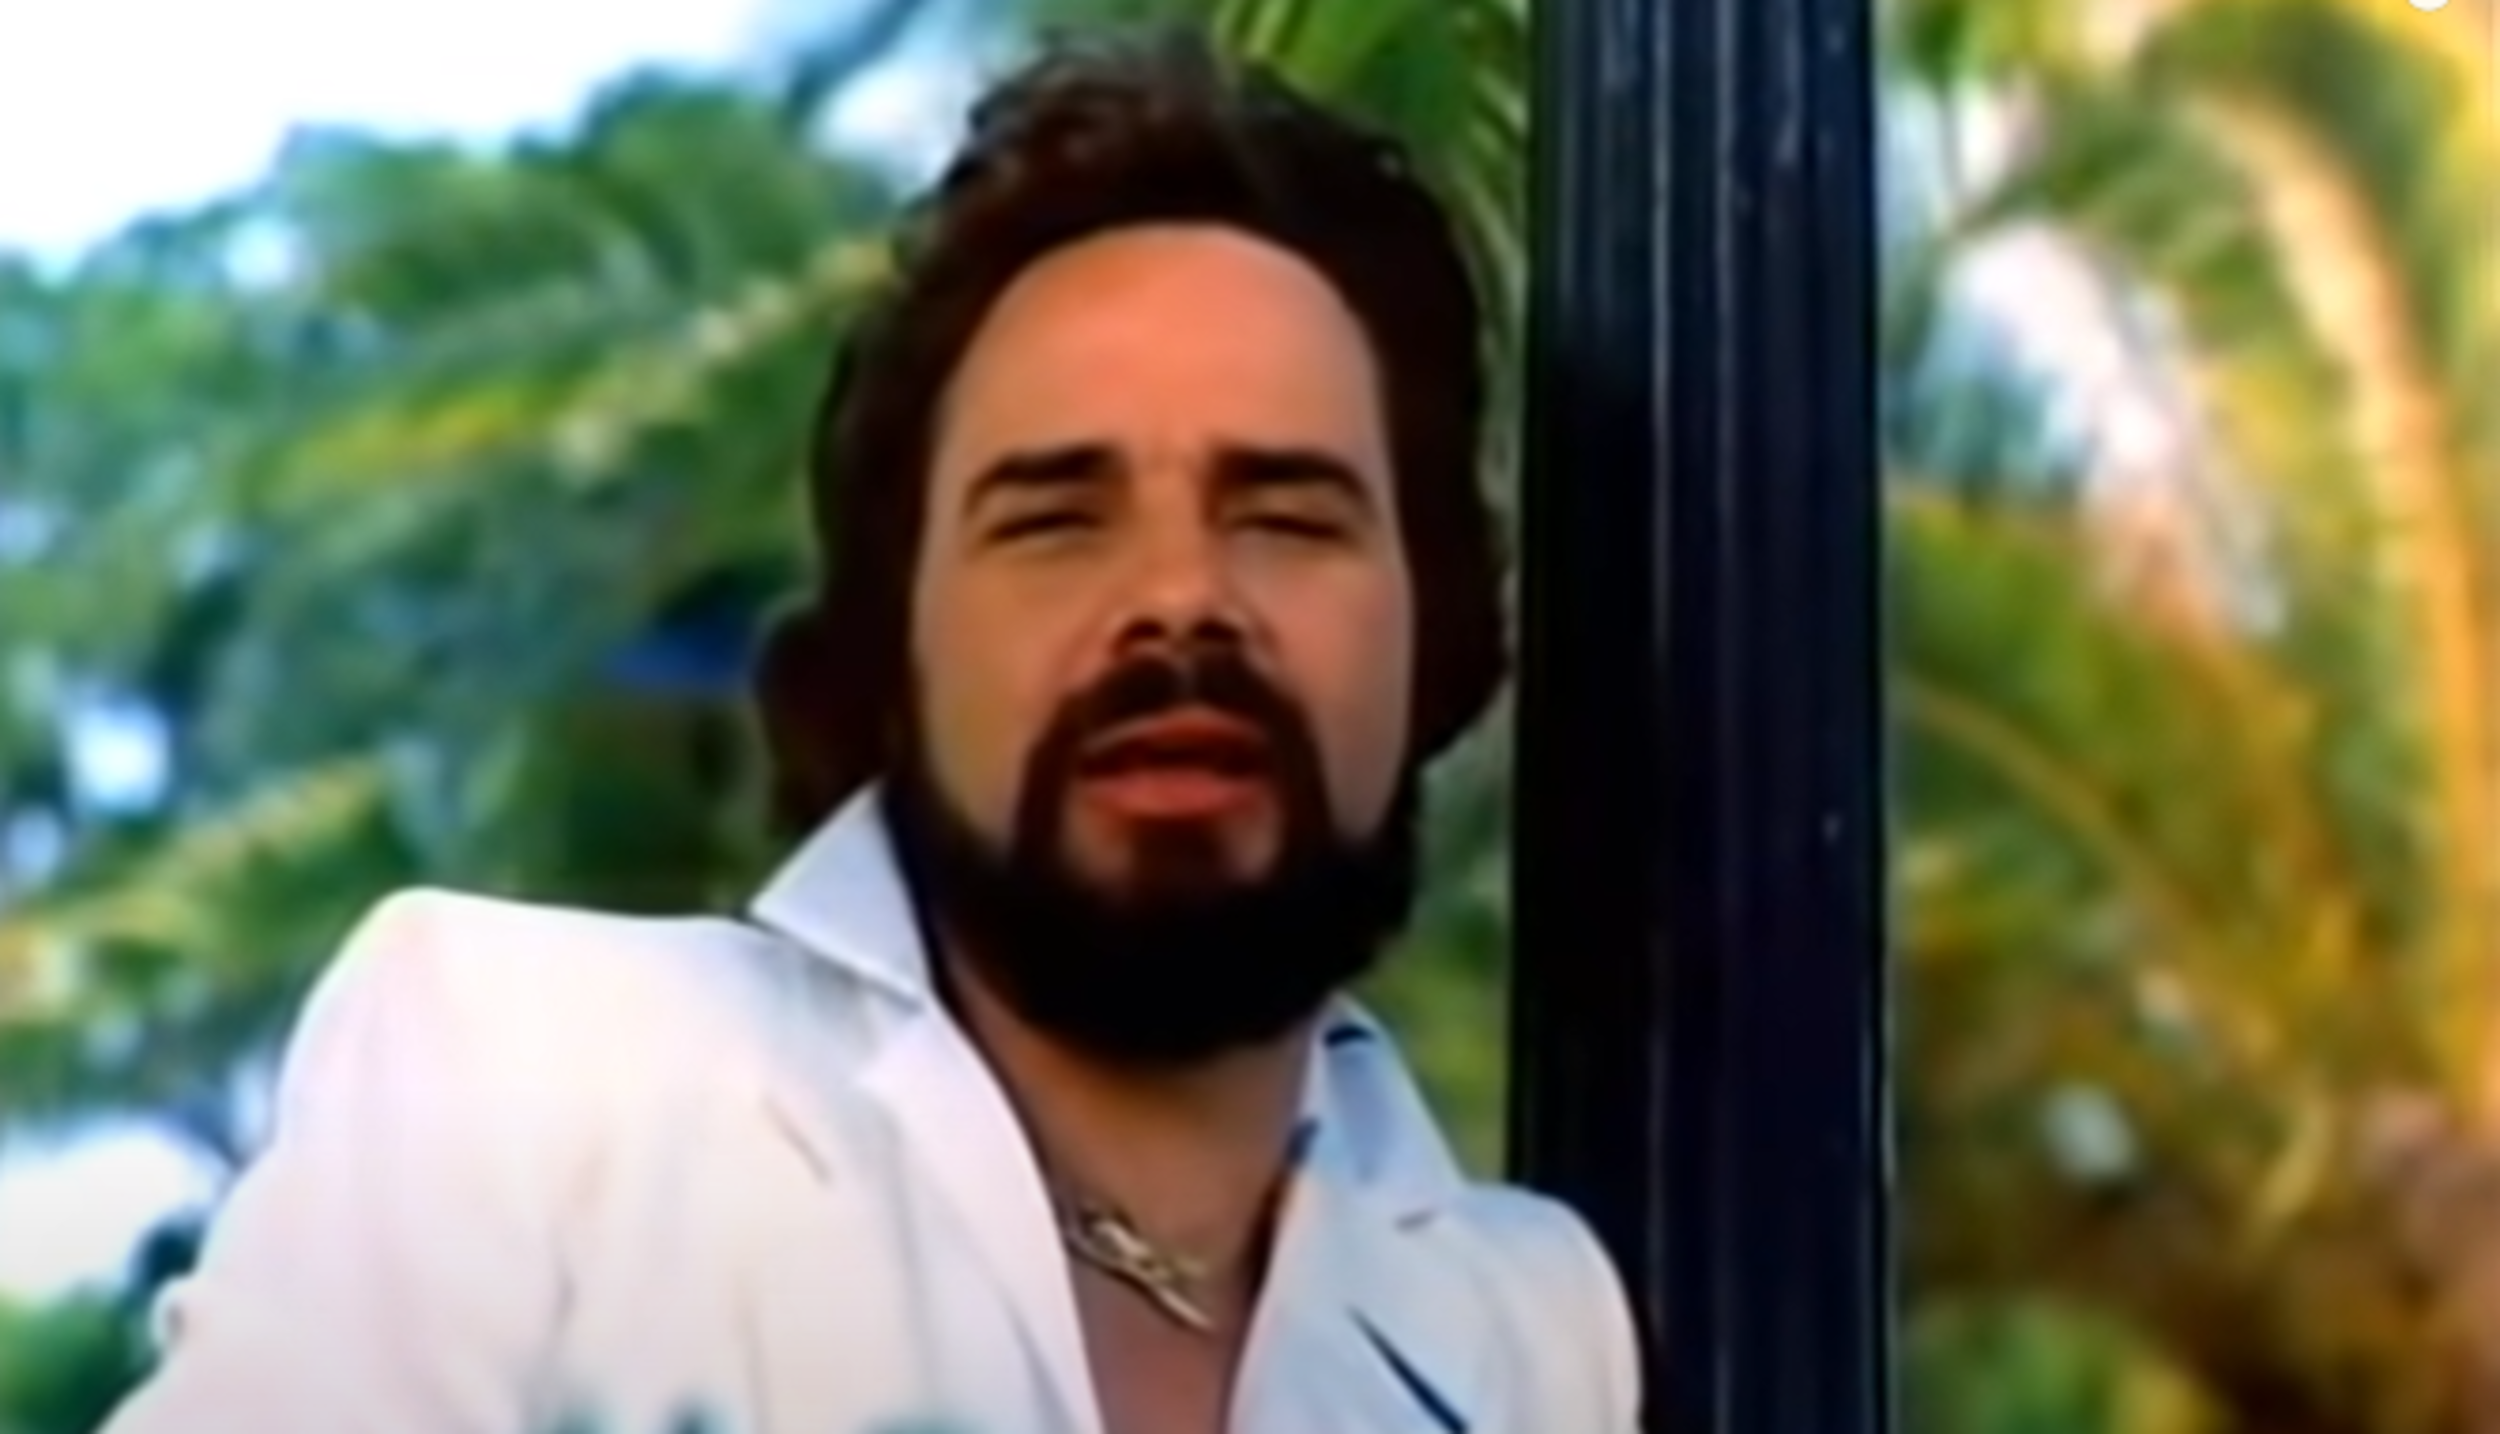 <p>Yacht rock and one-hit wonders seem to go hand-in-hand. Higgins scored one in the early 1980s with this number that reached No. 8 on the <em>Billboard</em> Hot 100. The Florida native was inspired to write this <a href="https://www.youtube.com/watch?v=Ru2tsT32pHA">song about trying to avoid a romantic breakup</a> by the 1948 movie of the same name, starring Humphrey Bogart and Lauren Bacall, who are referenced in the tune. Though Higgins never enjoyed the same individual success as a musician, the song has had a solid shelf life and remains a definitive moment in the yacht rock genre.</p><p>You may also like: <a href='https://www.yardbarker.com/entertainment/articles/the_20_best_comedy_central_roast_jokes_of_all_time/s1__26902196'>The 20 best 'Comedy Central Roast' jokes of all time</a></p>